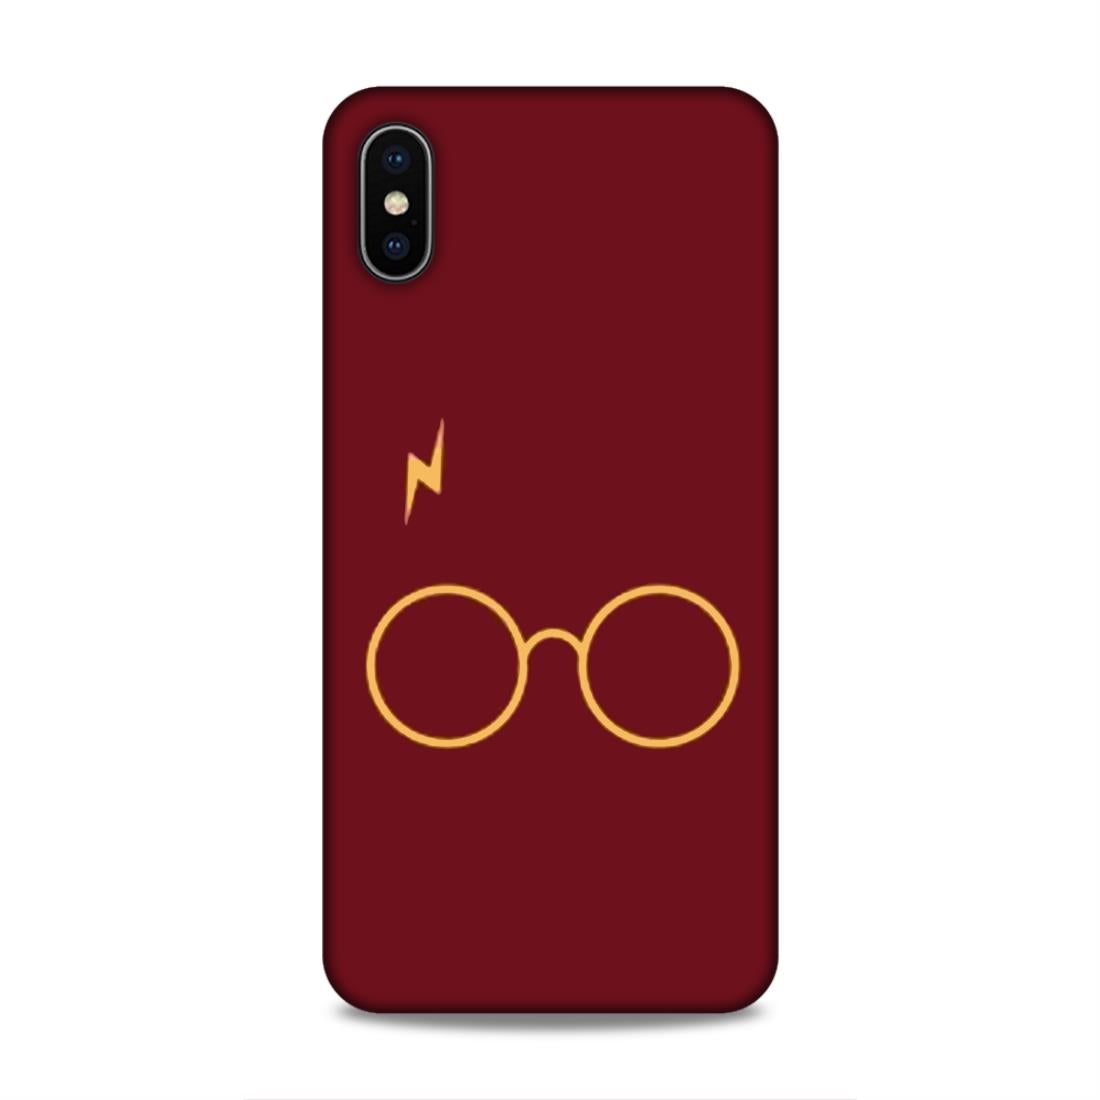 Spects Hard Back Case For Apple iPhone XS Max